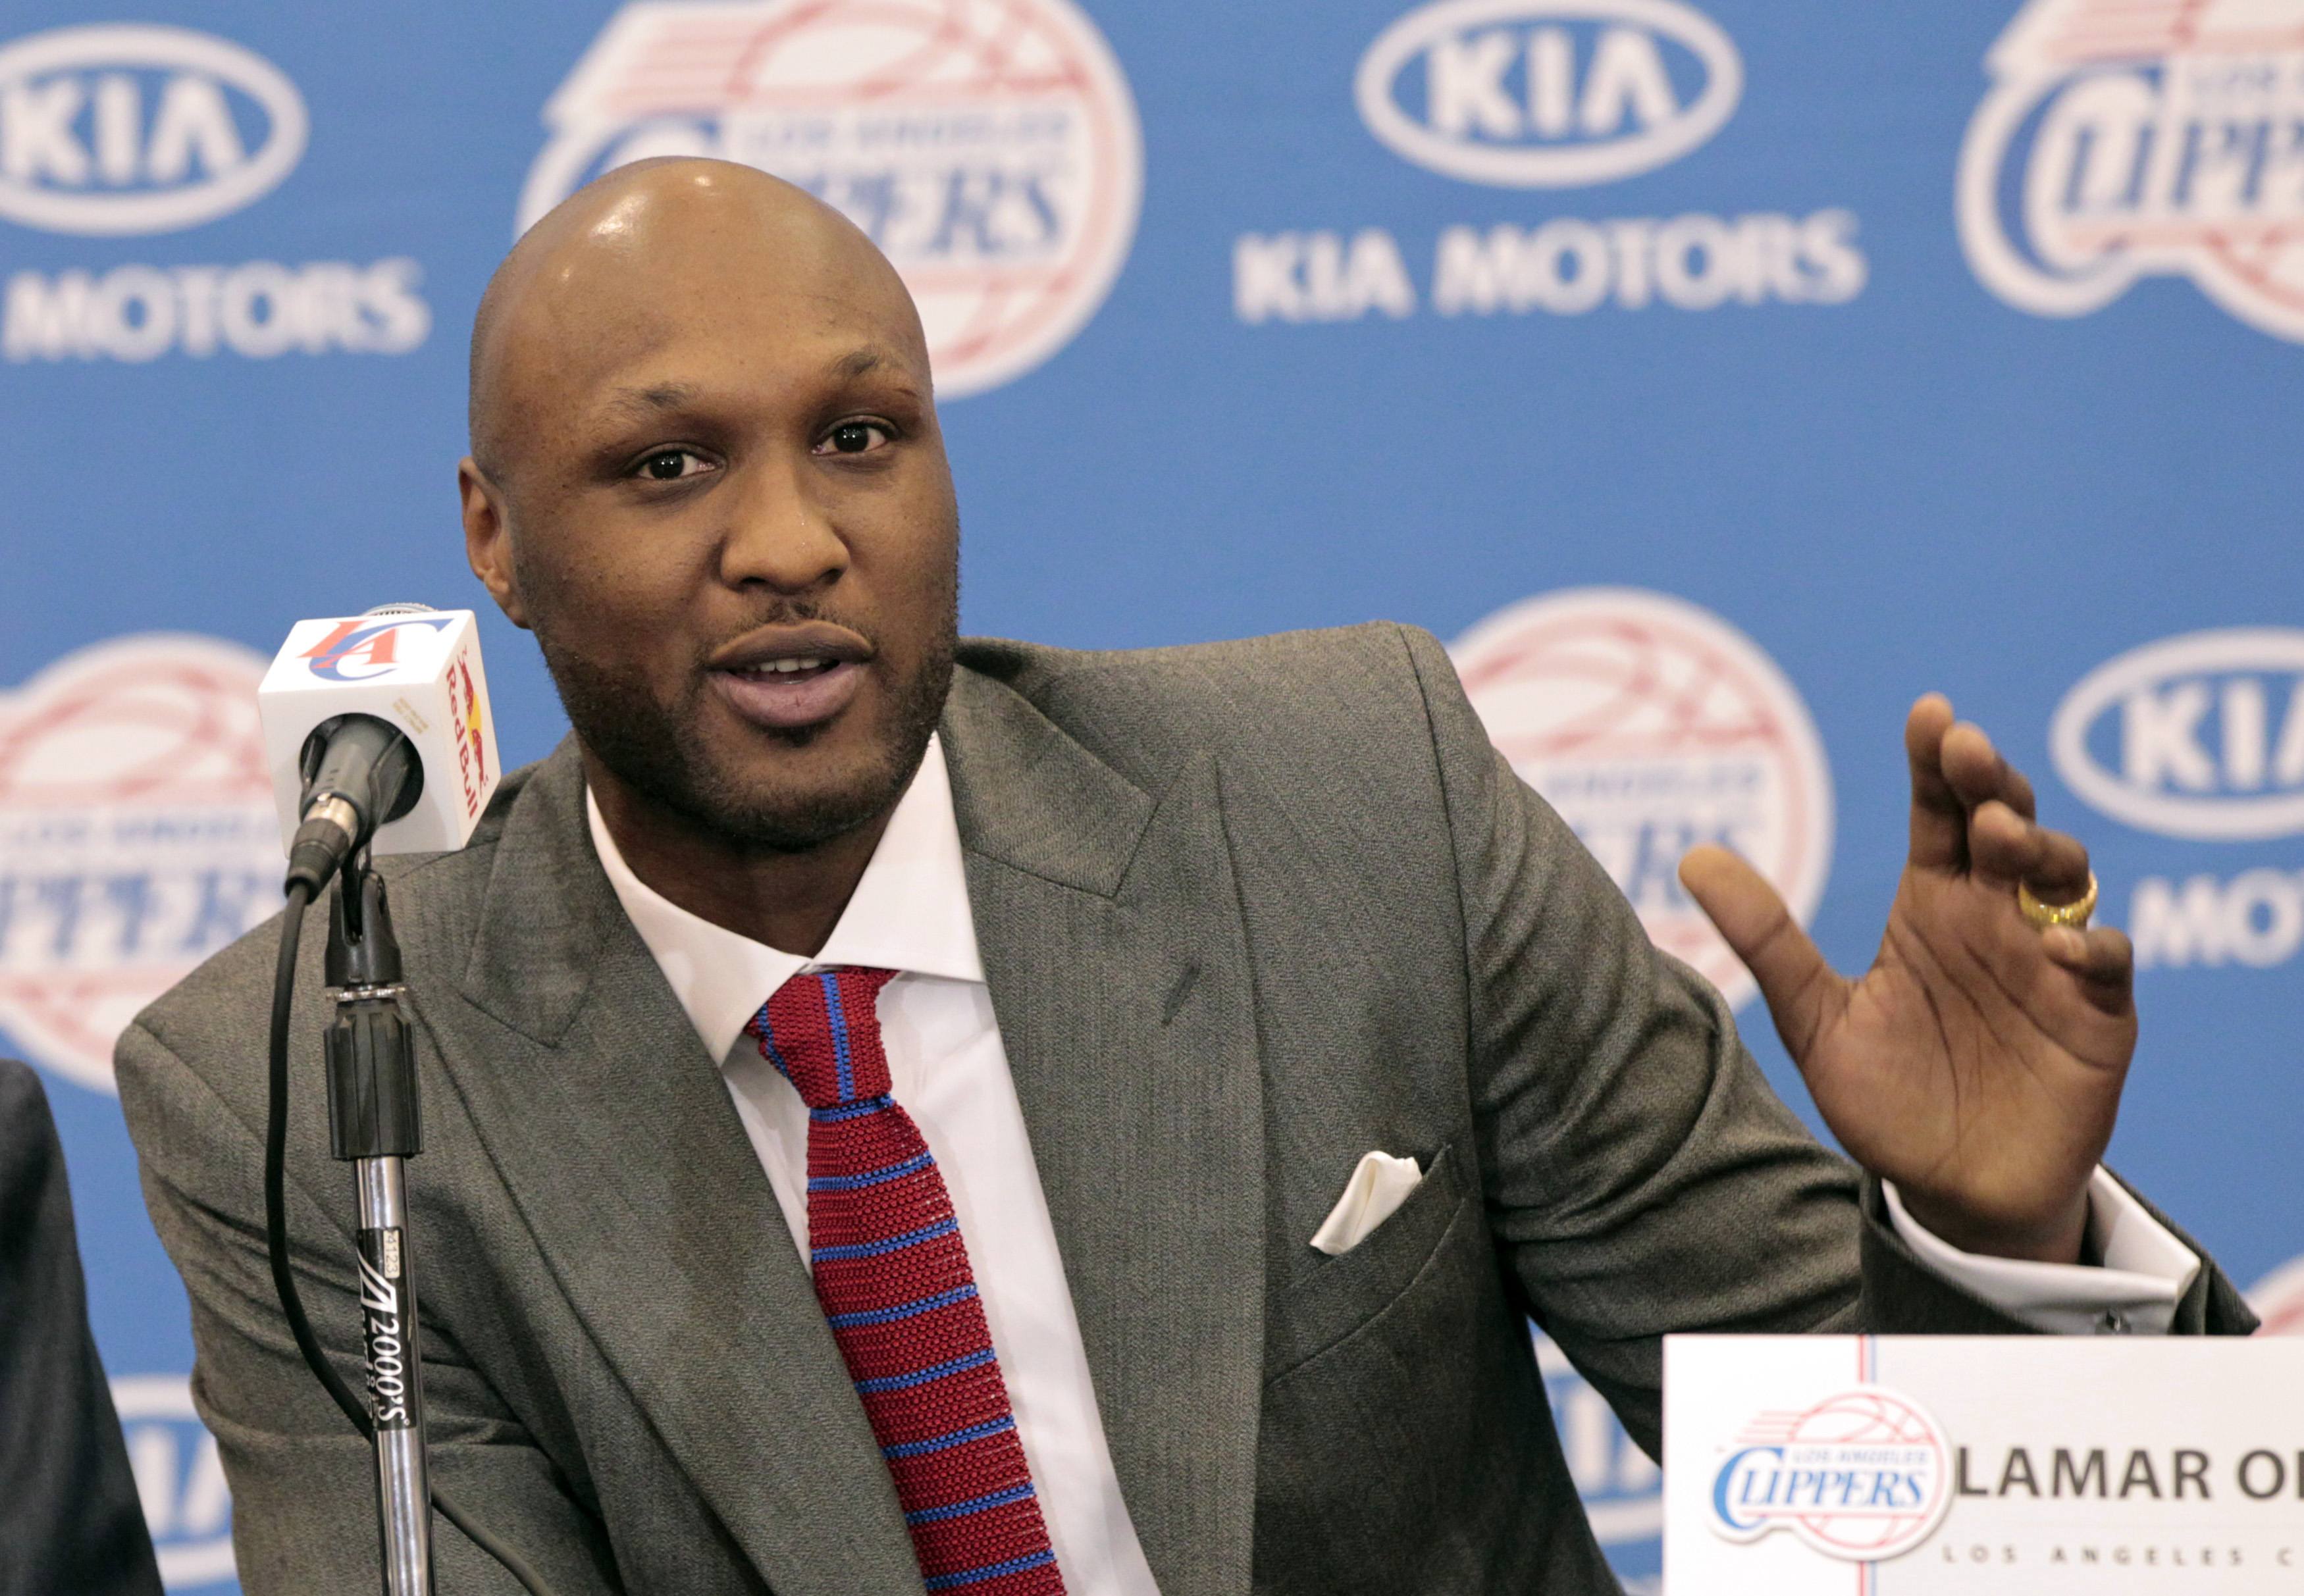 Basketball player Lamar Odom speaks at a news conference announcing his acquisition by the Los Angeles Clippers in Los Angeles, California in this July 2, 2012 file photo. REUTERS/Mario Anzuoni/Files